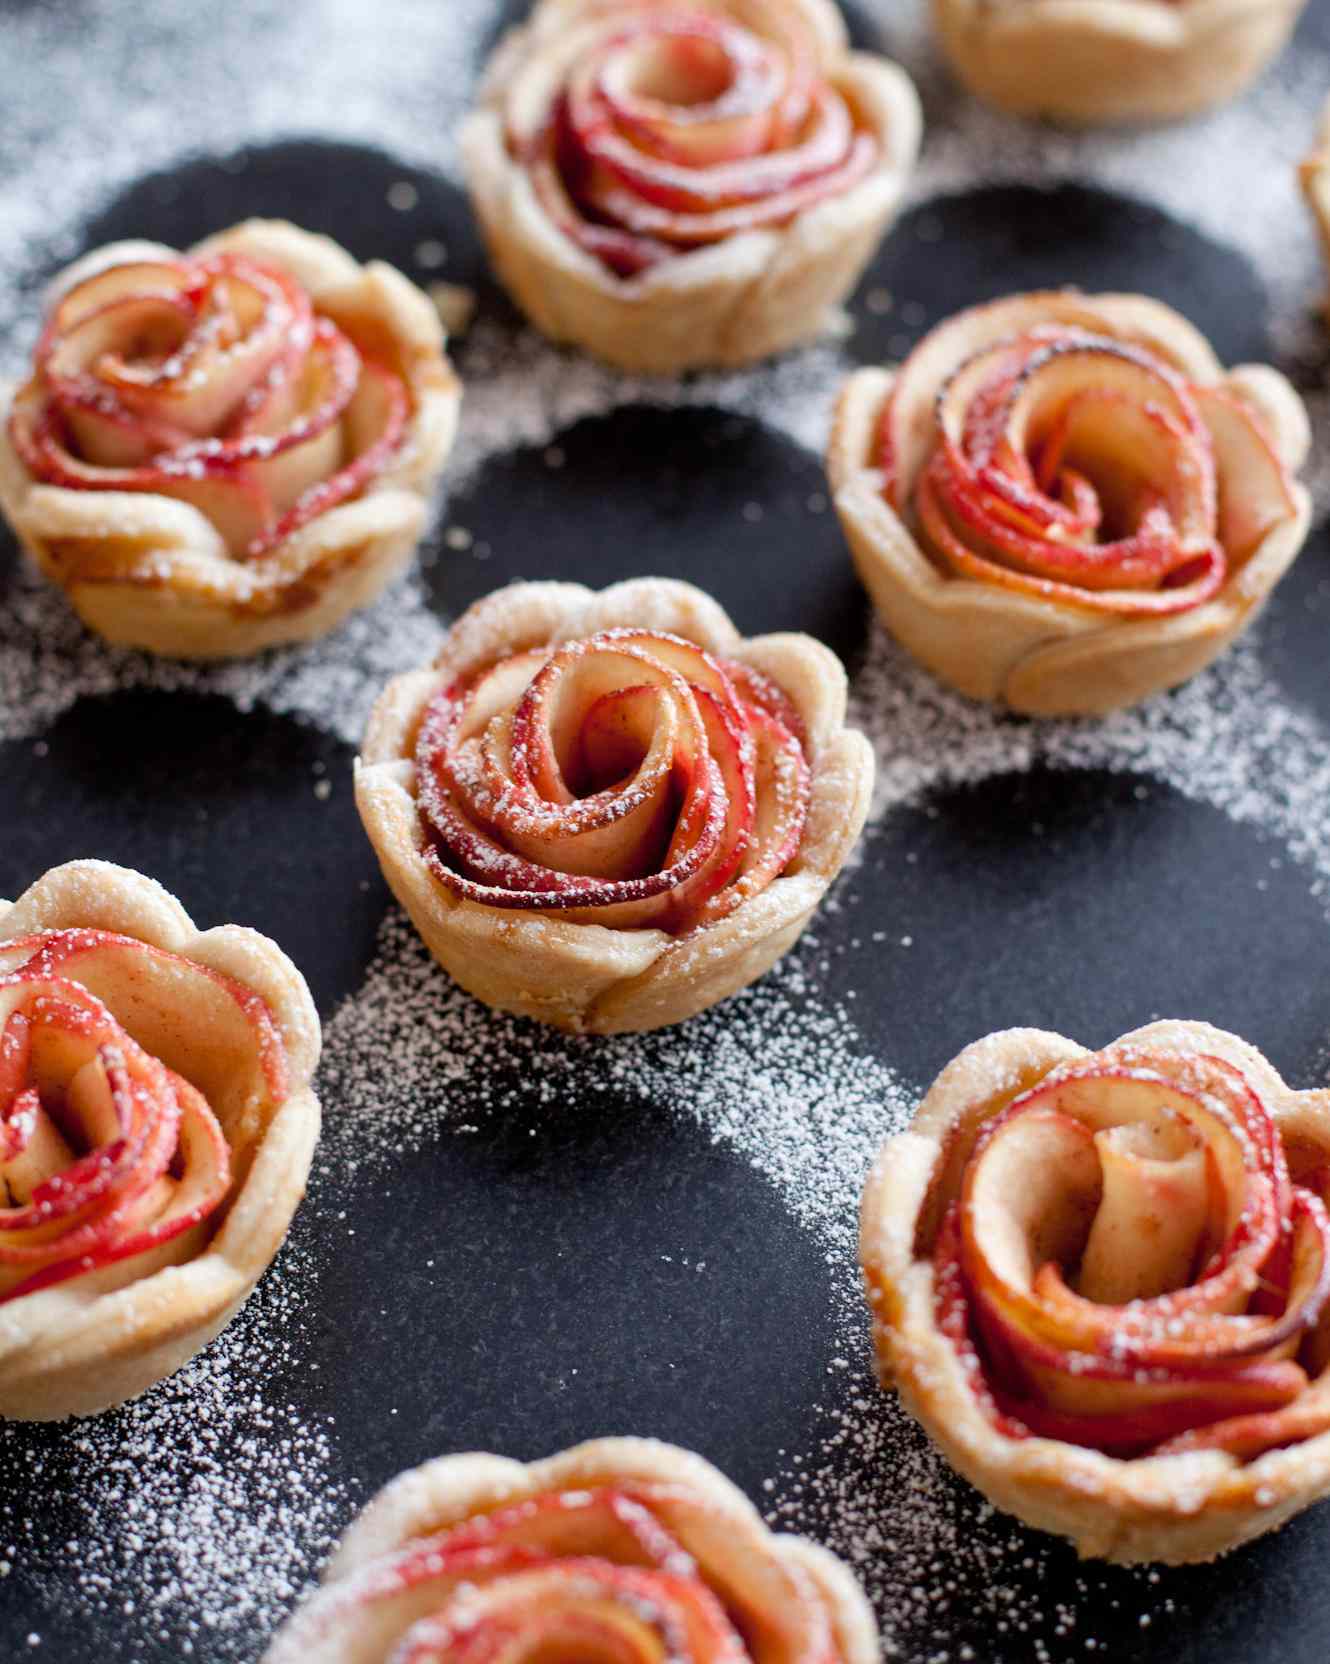 Dust mini rose apple pies with powdered sugar